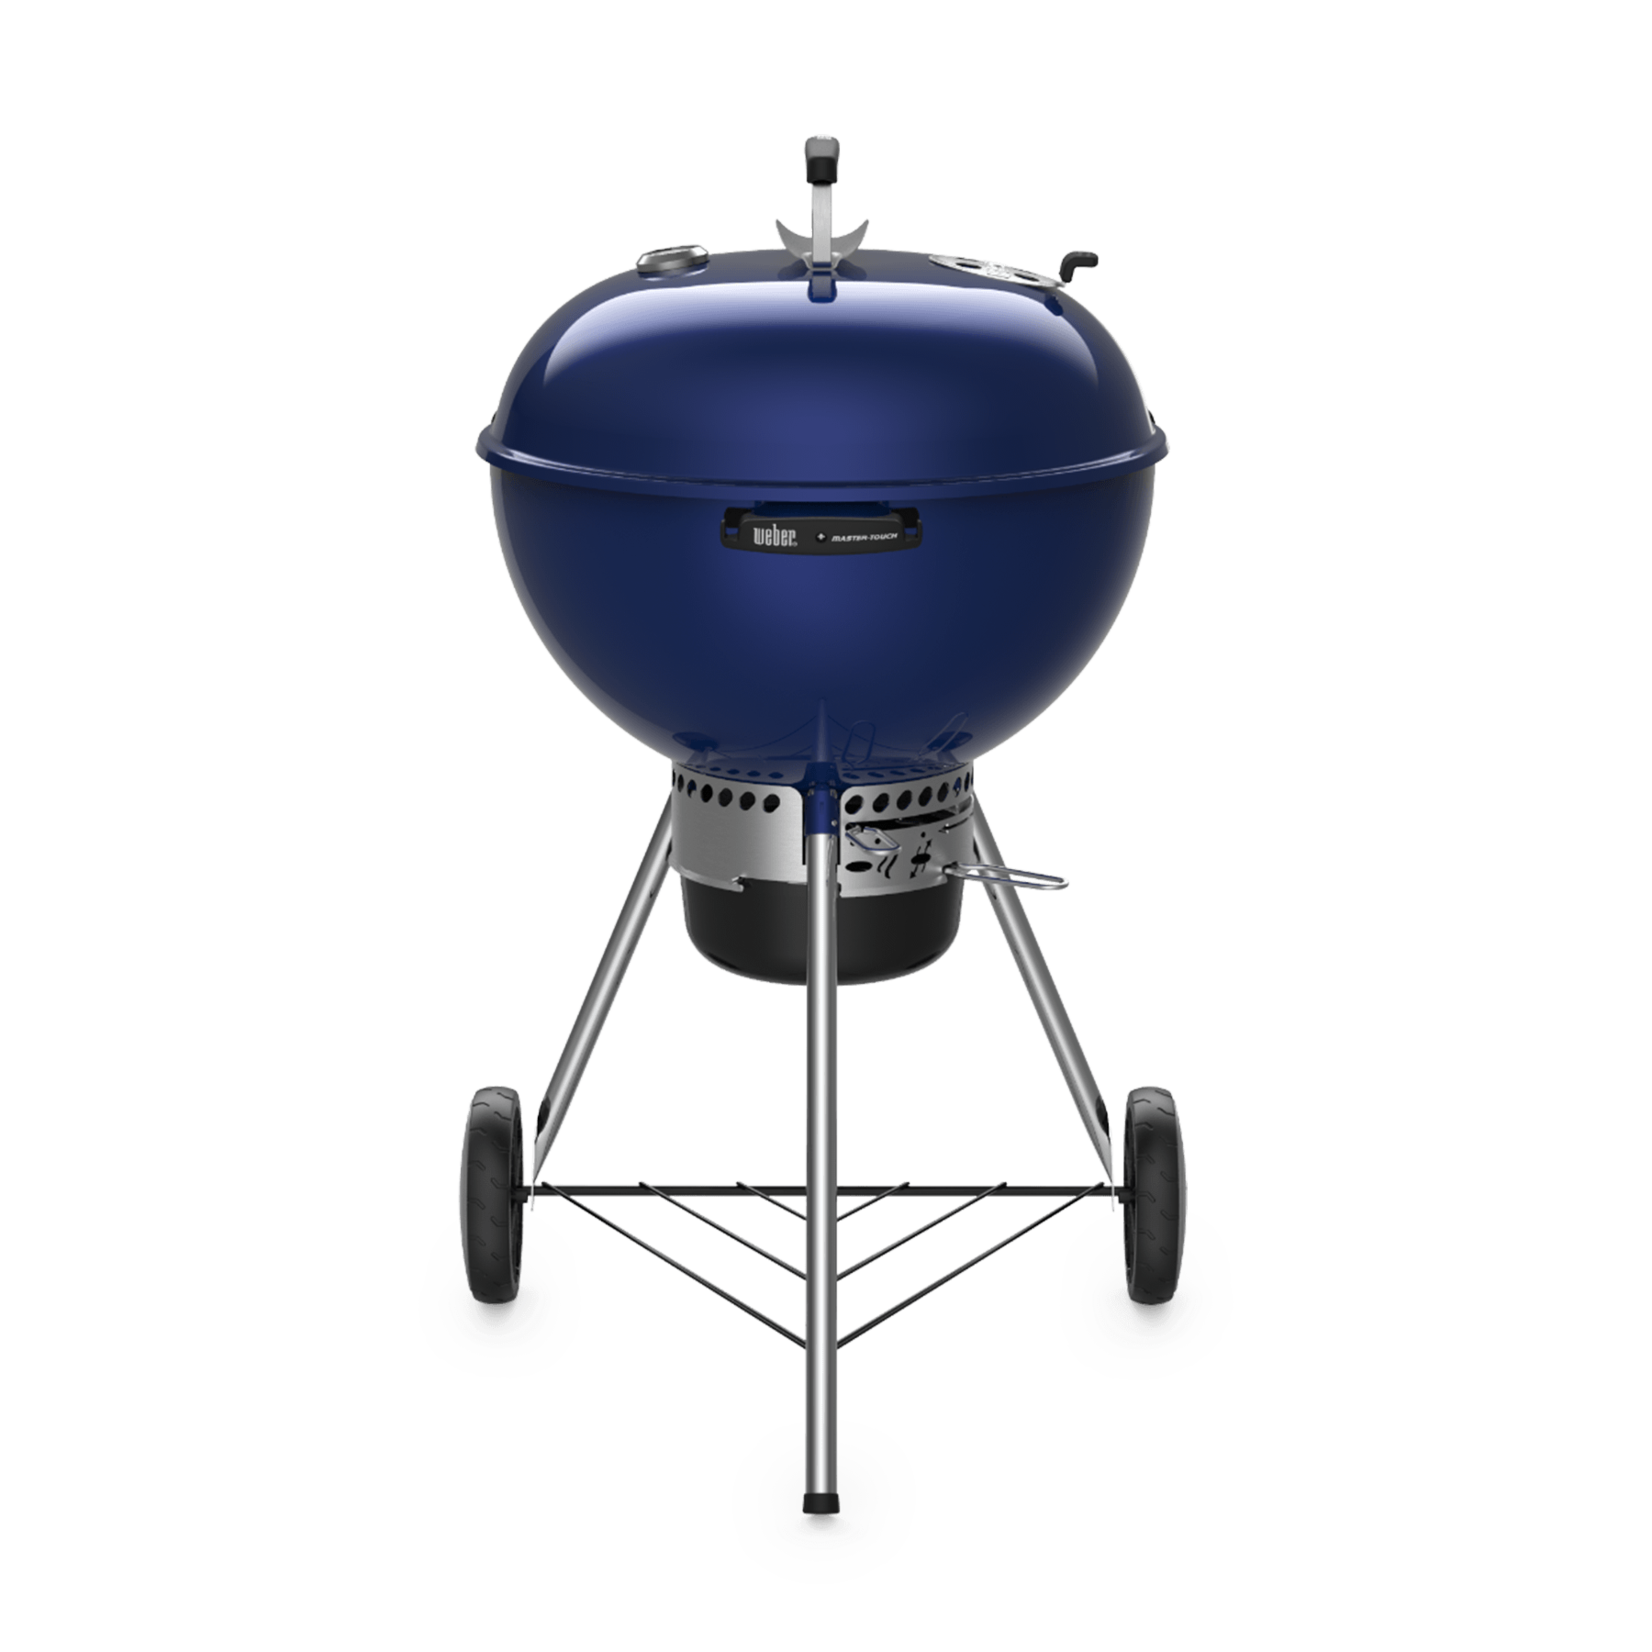 Weber Master-Touch 22" Charcoal Grill, Ocean Blue